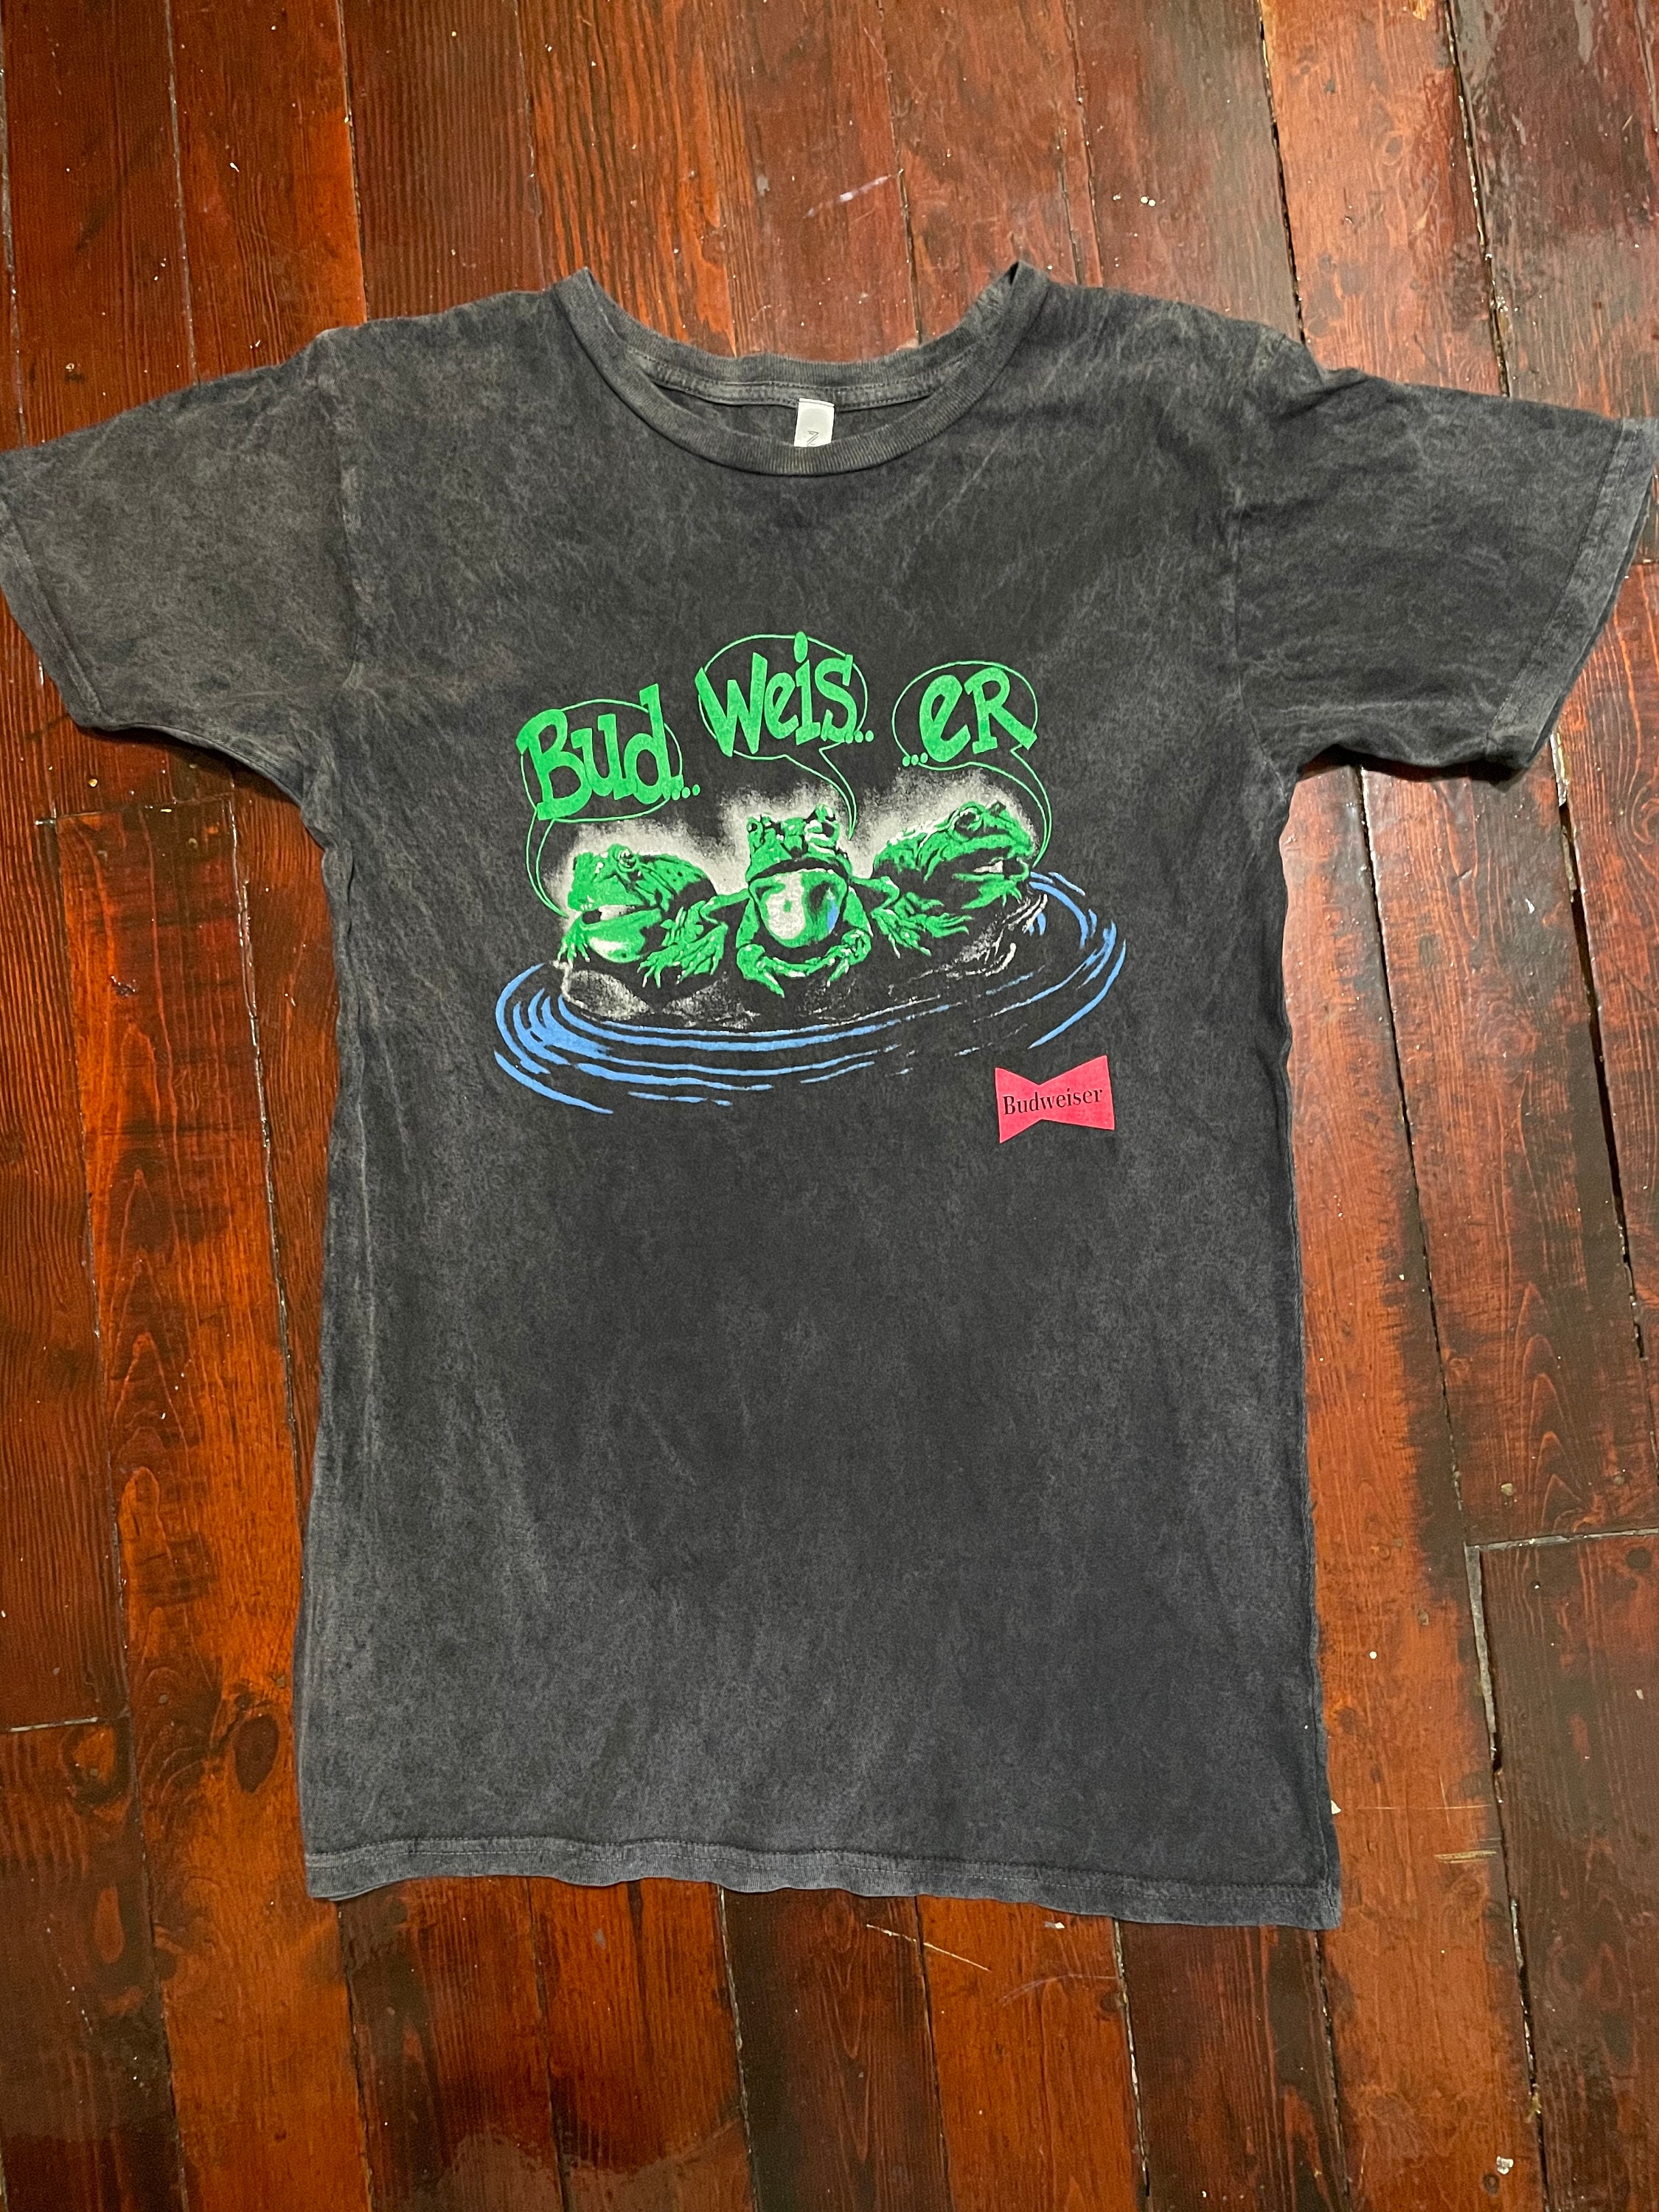 Officially licensed vintage Budweiser frogs t shirt | Etsy